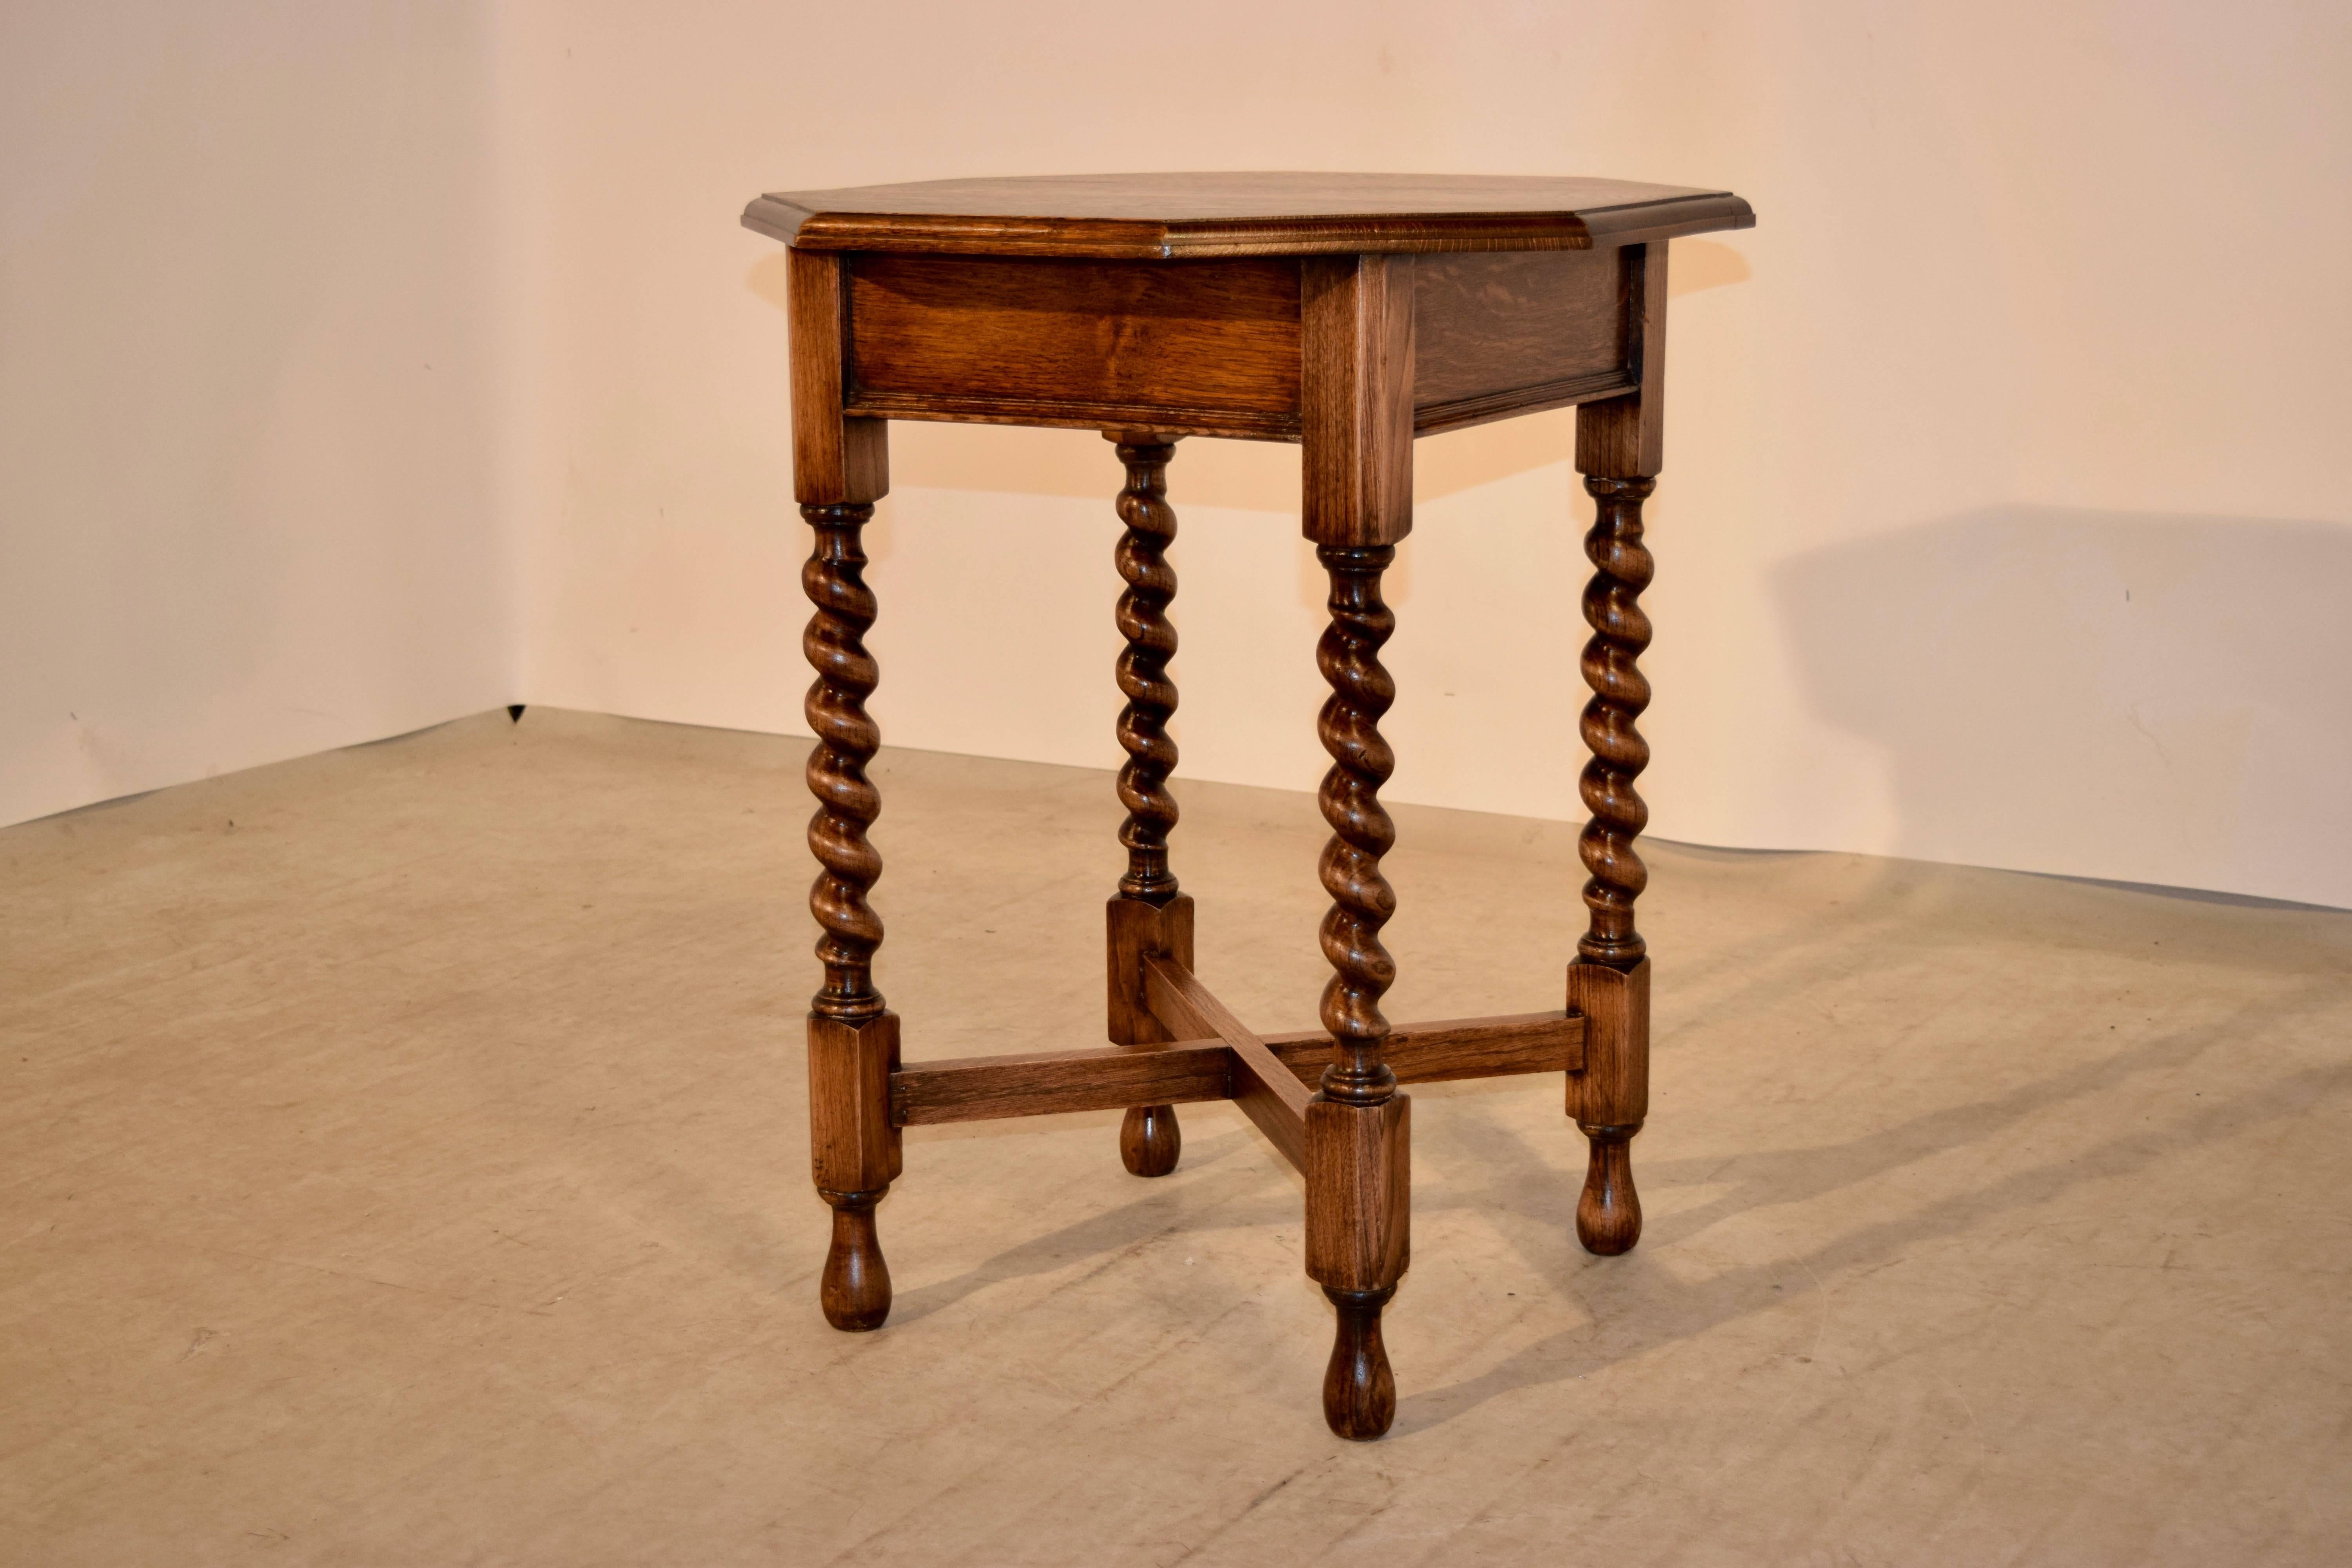 Late 19th century English oak side table with an octagonal shaped top which is bevelled around the edge, following down to a simple panelled apron and supported on thickly hand turned barley twist legs, joined by simple cross stretchers and